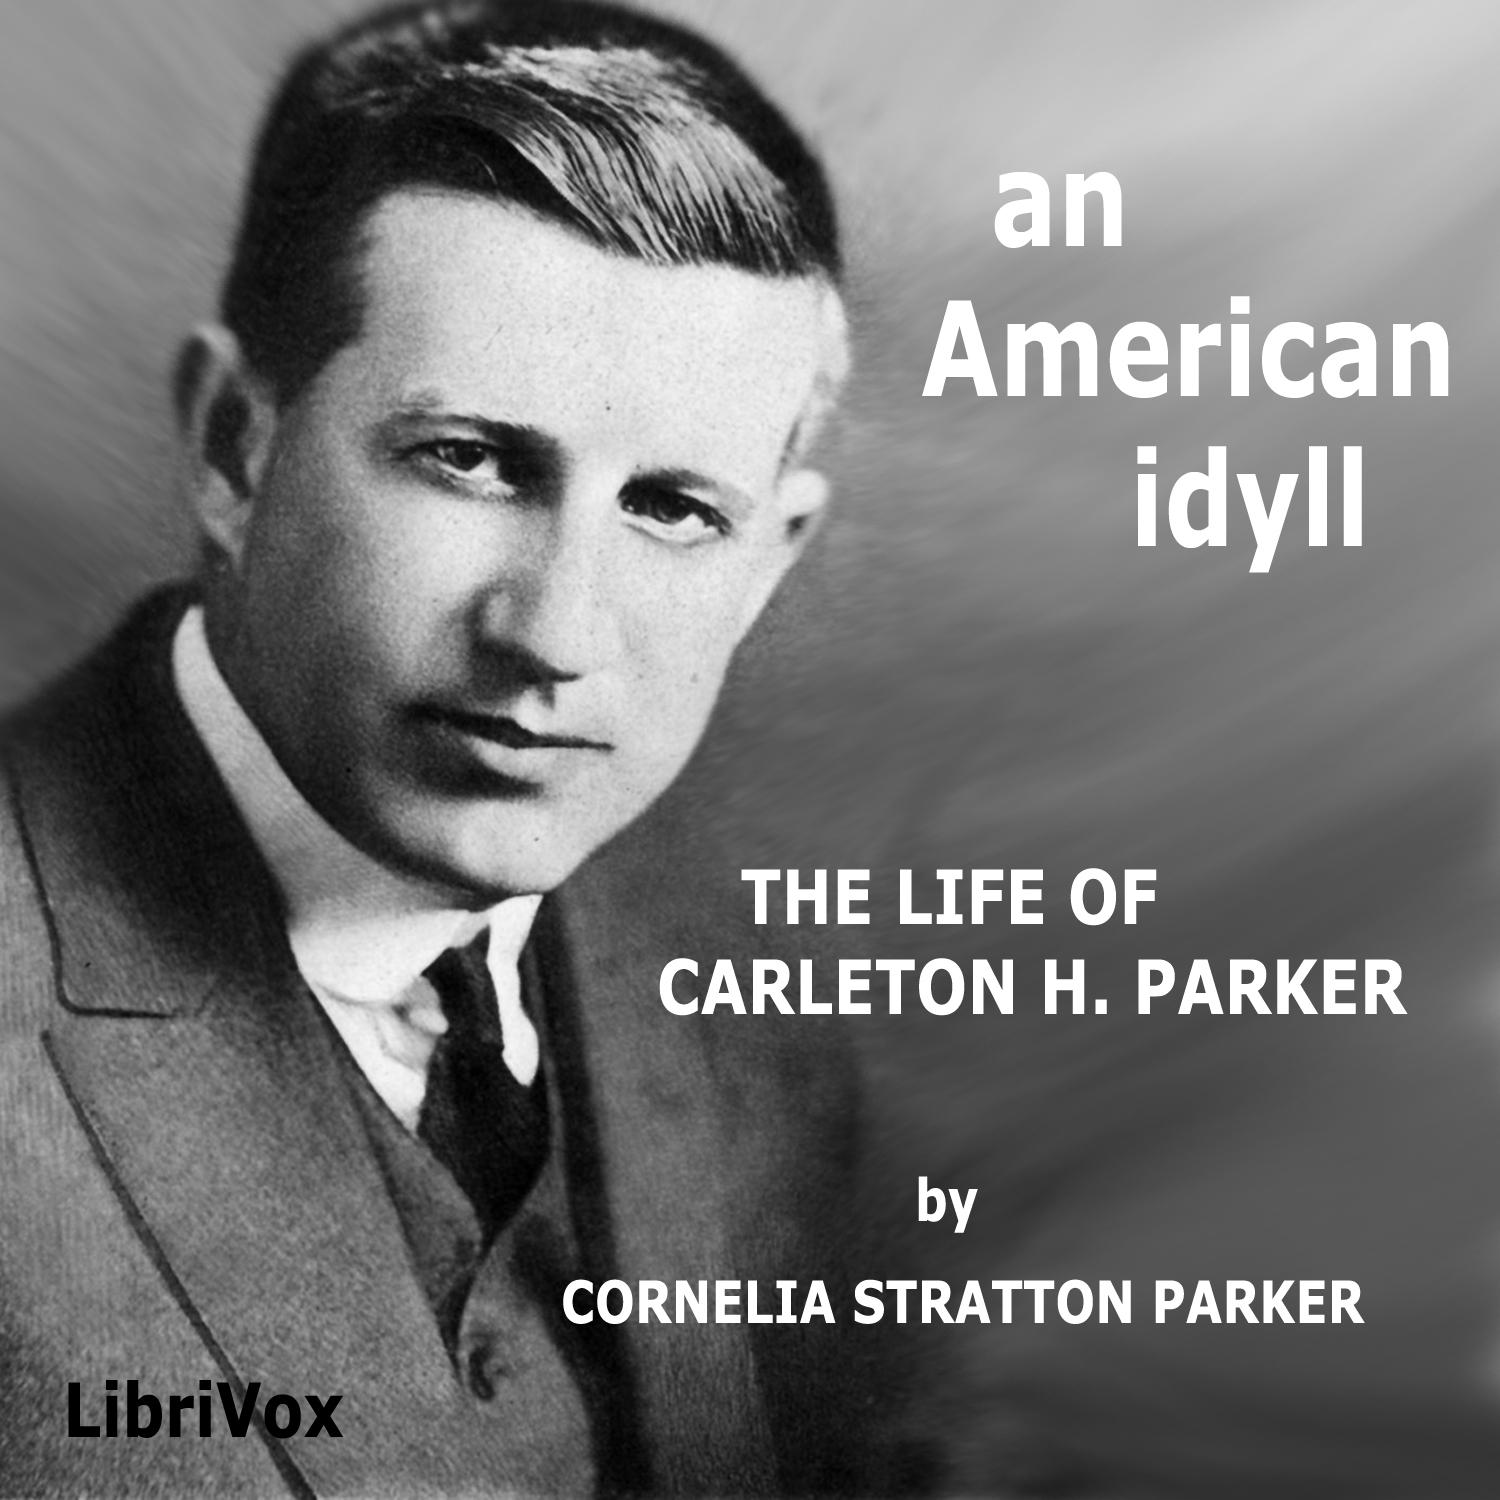 An American Idyll: The Life of Carlton H. Parker, #8 - Chapter VII